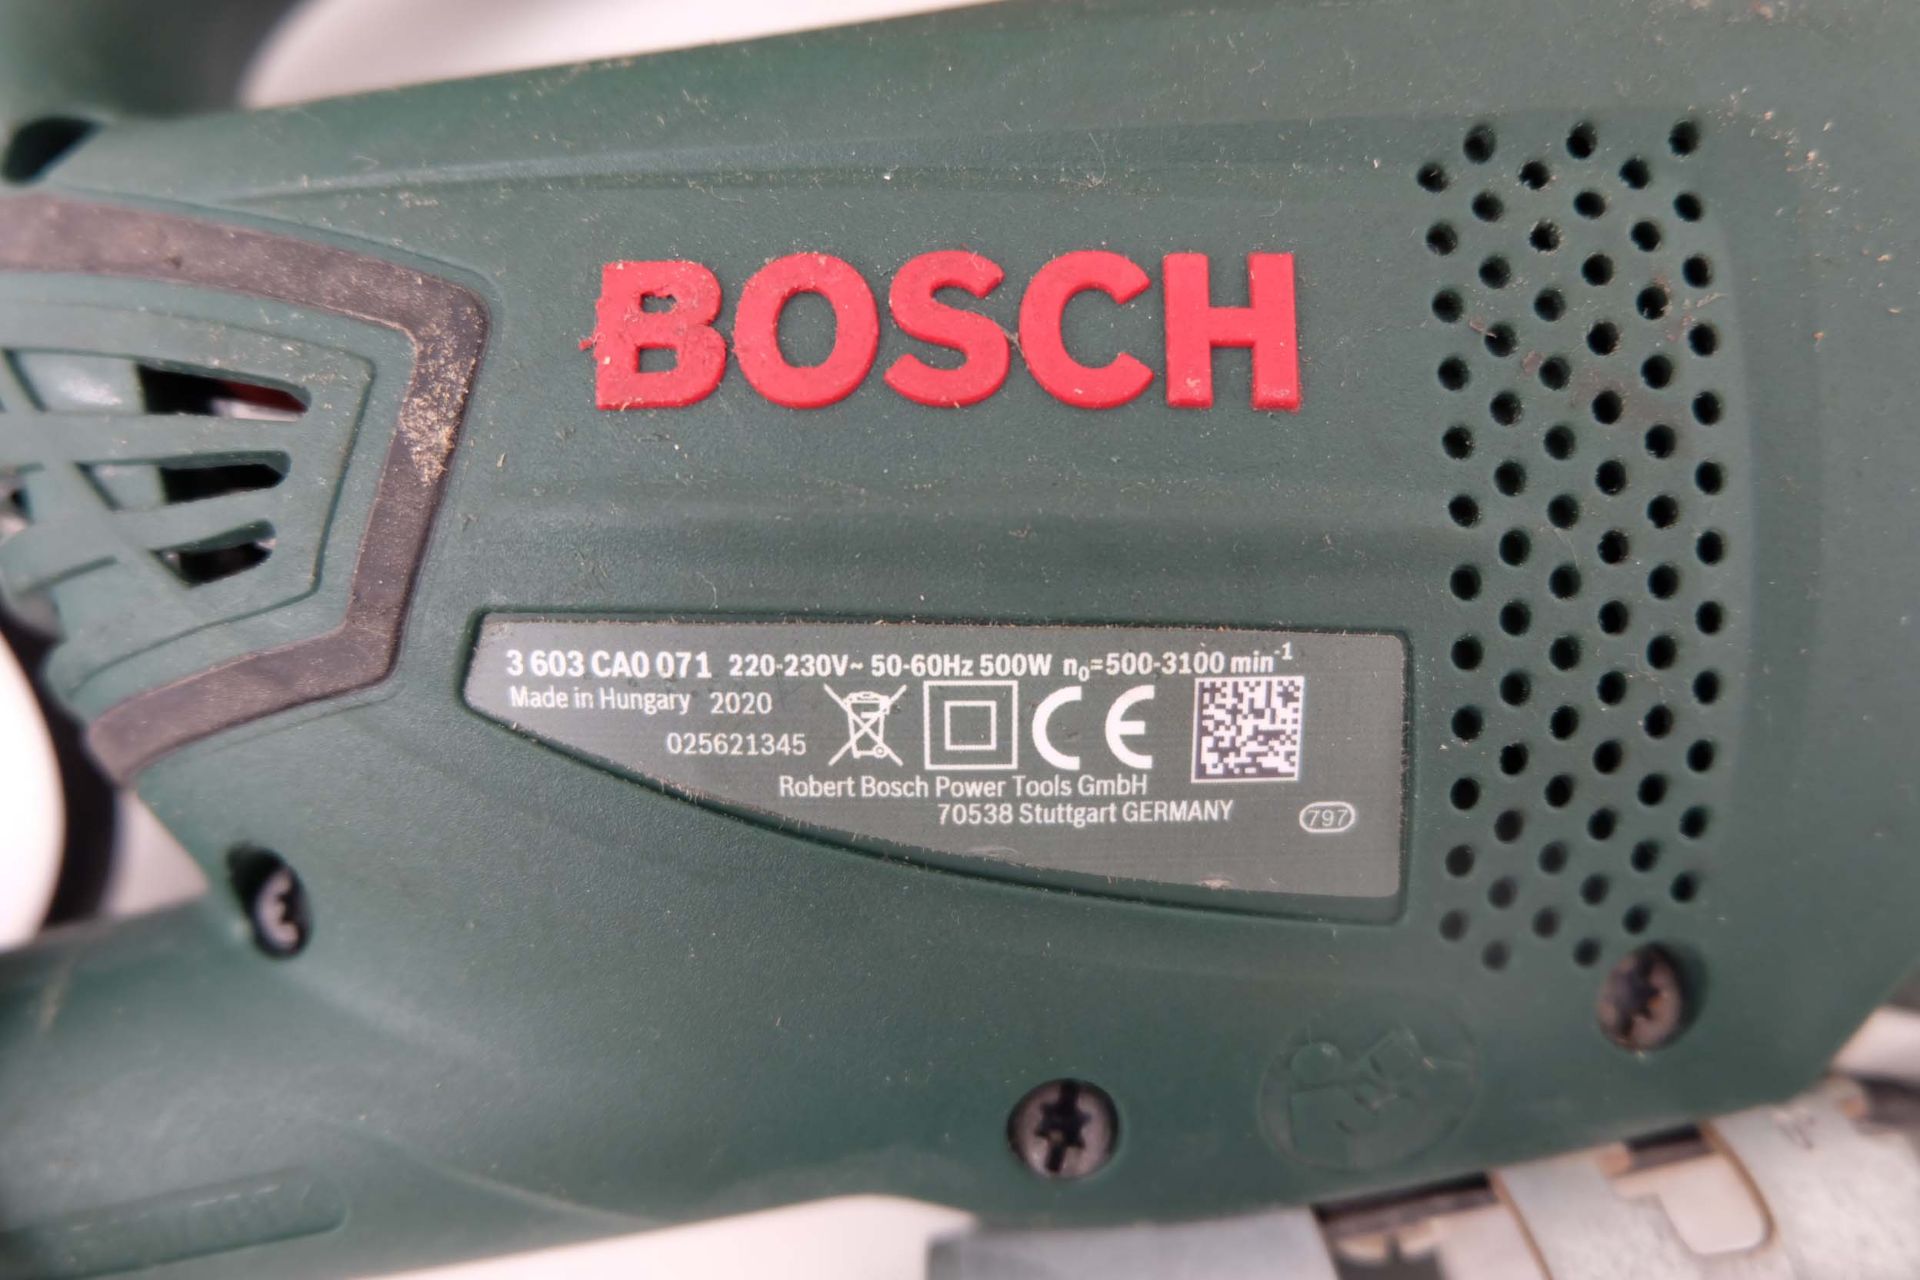 Bosch PST 7200E Jigsaw. Max Cutting Depth 72mm. Single Phase 500W. With Carry Case. - Image 4 of 5